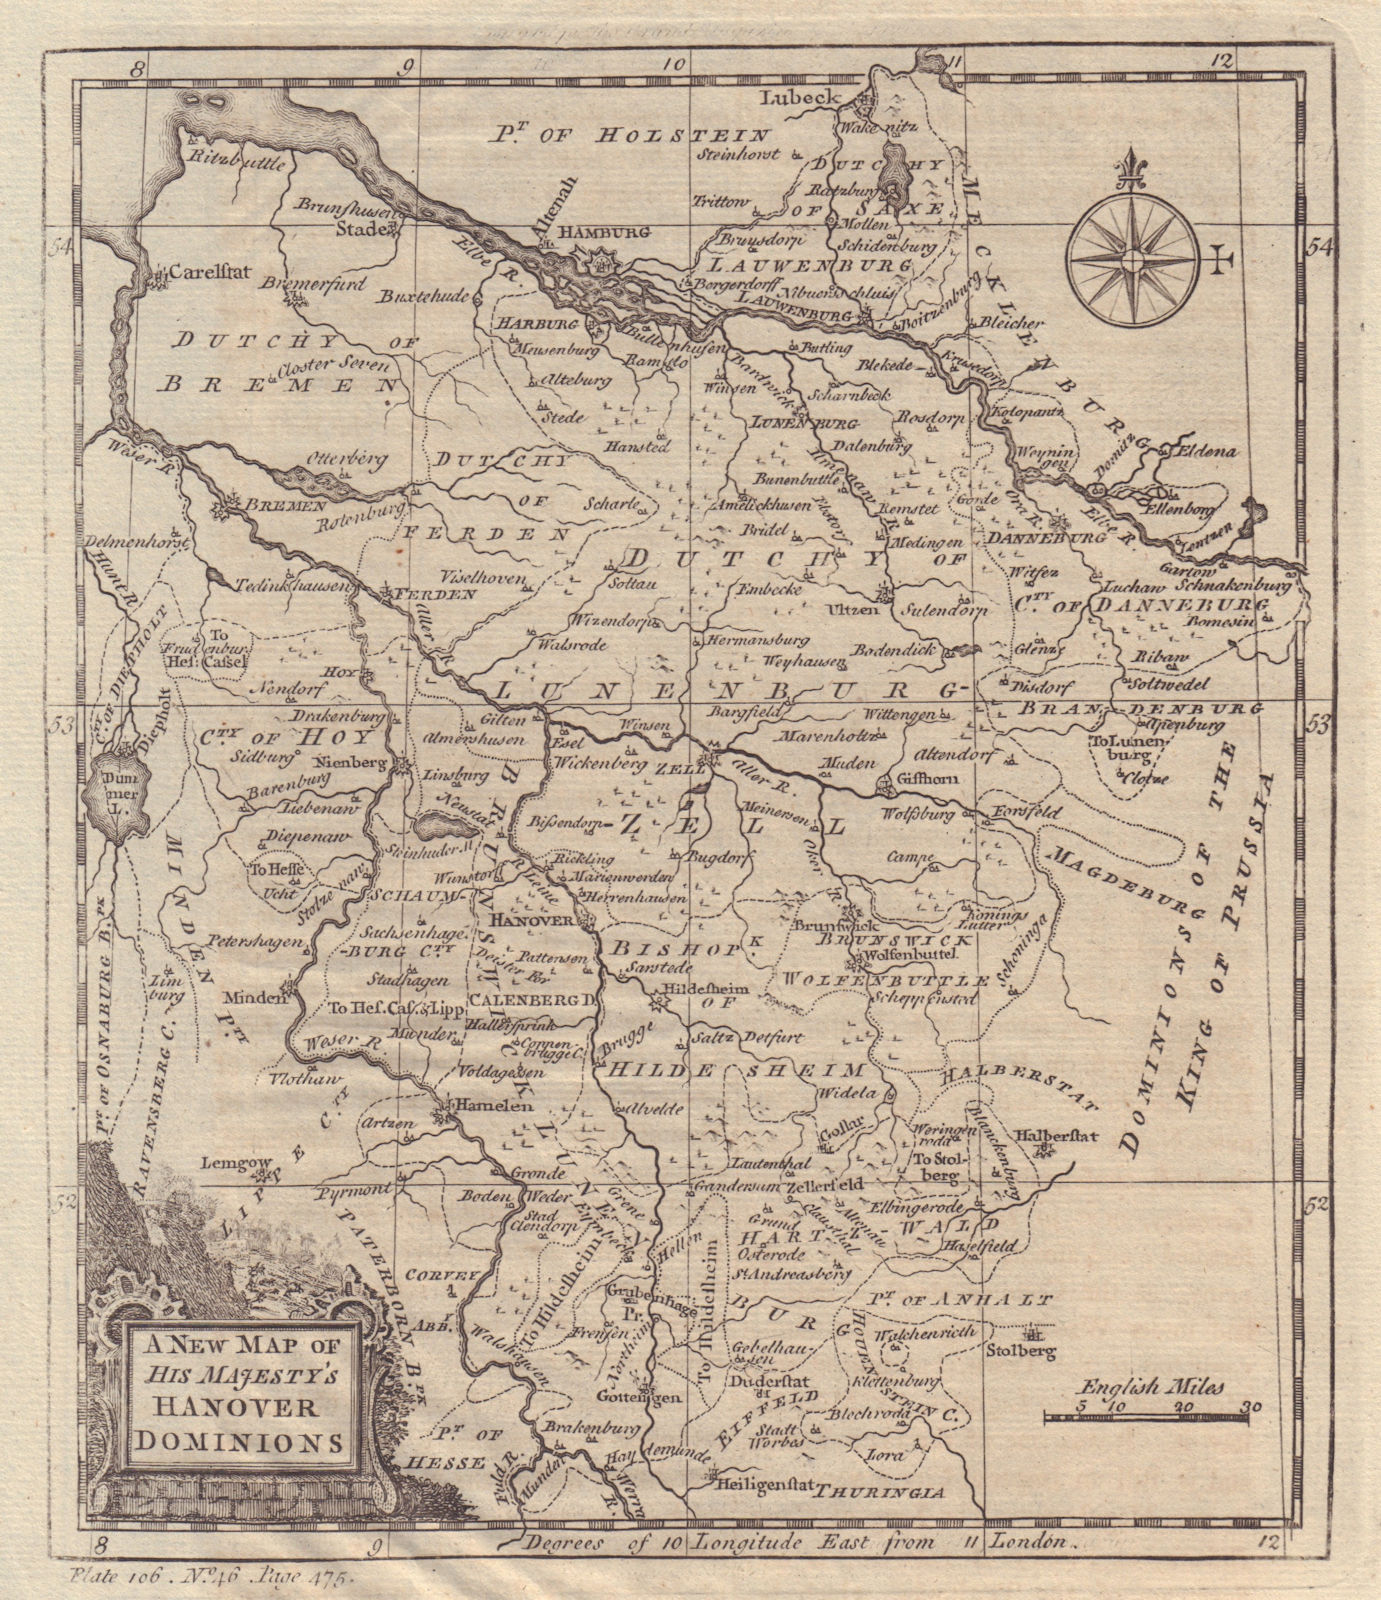 Associate Product "A new Map of His Majesty's Hanover Dominions". Lower Saxony. KITCHIN 1752